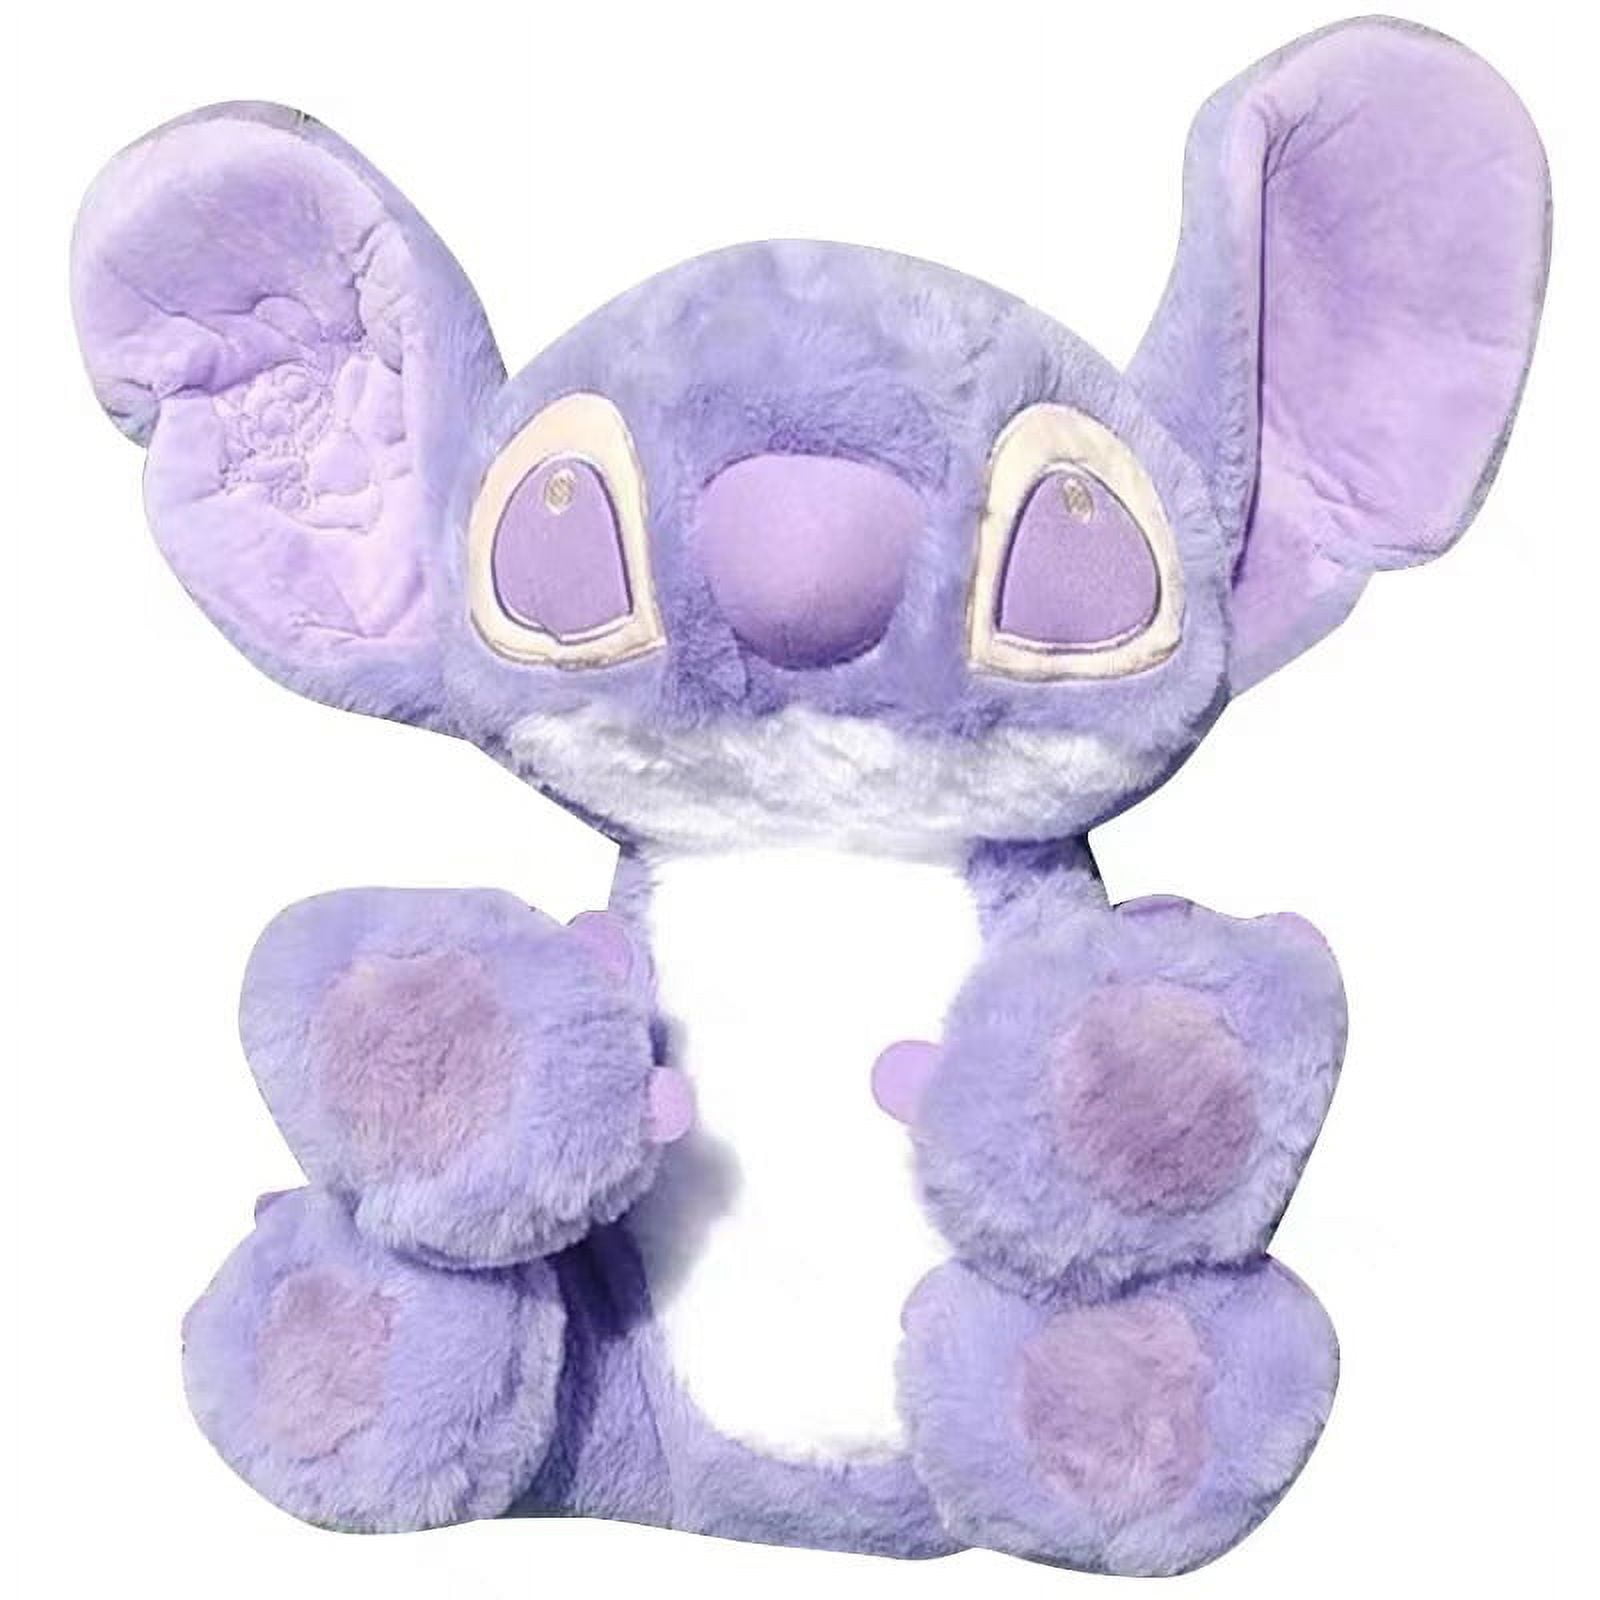  Disney Stitch Plush - 6 inch Mini Bean Bag, Lilo and Stitch,  Cuddly Alien Soft Toy with Big Floppy Ears and Fuzzy Texture, Suitable for  All Ages 0+ Toy Figure 